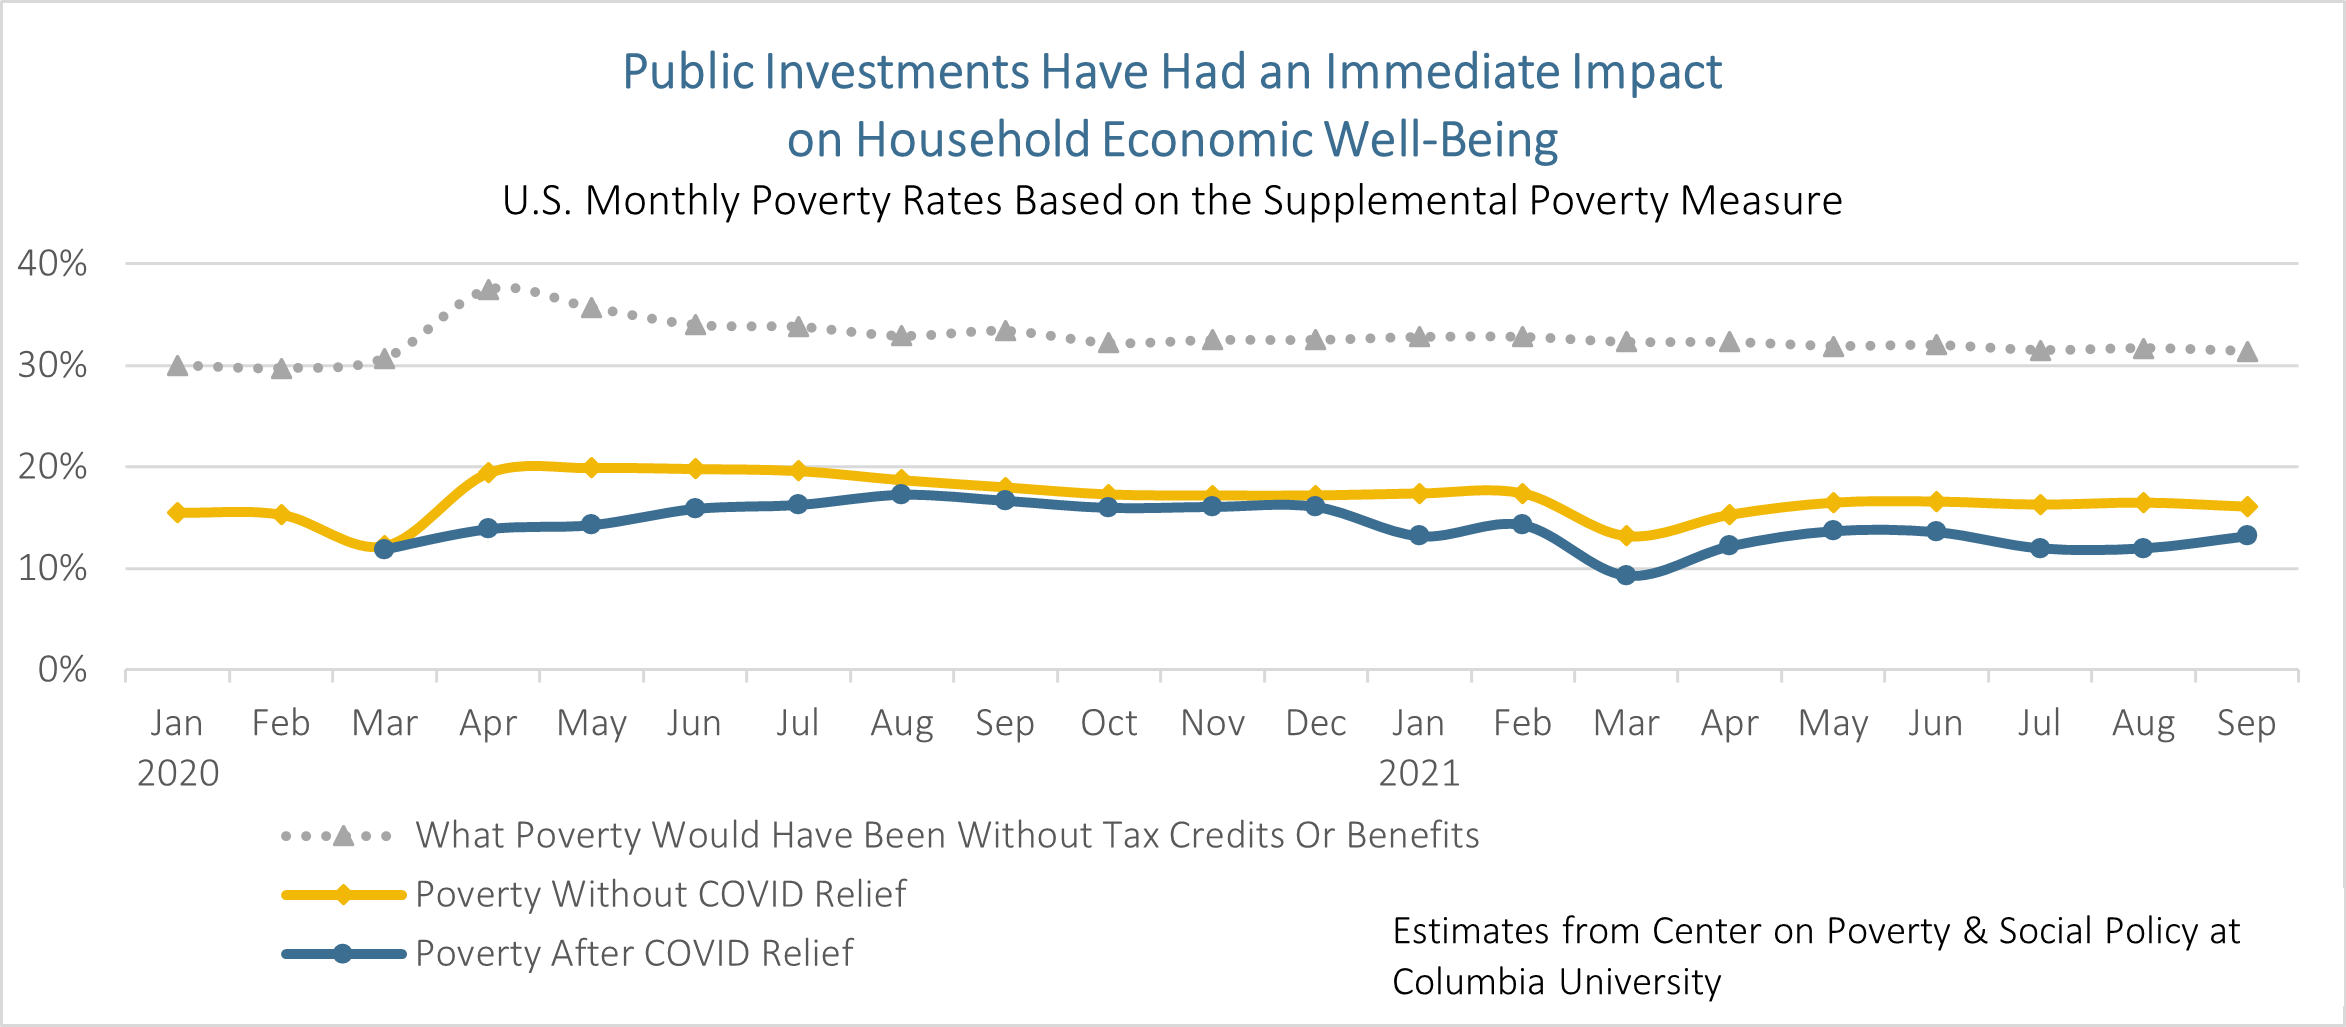 Public Investments Have Had an Immediate Impact on Households Economic Well-Being - U.S. Monthly Poverty Rates Based on the Supplemental Poverty Measure